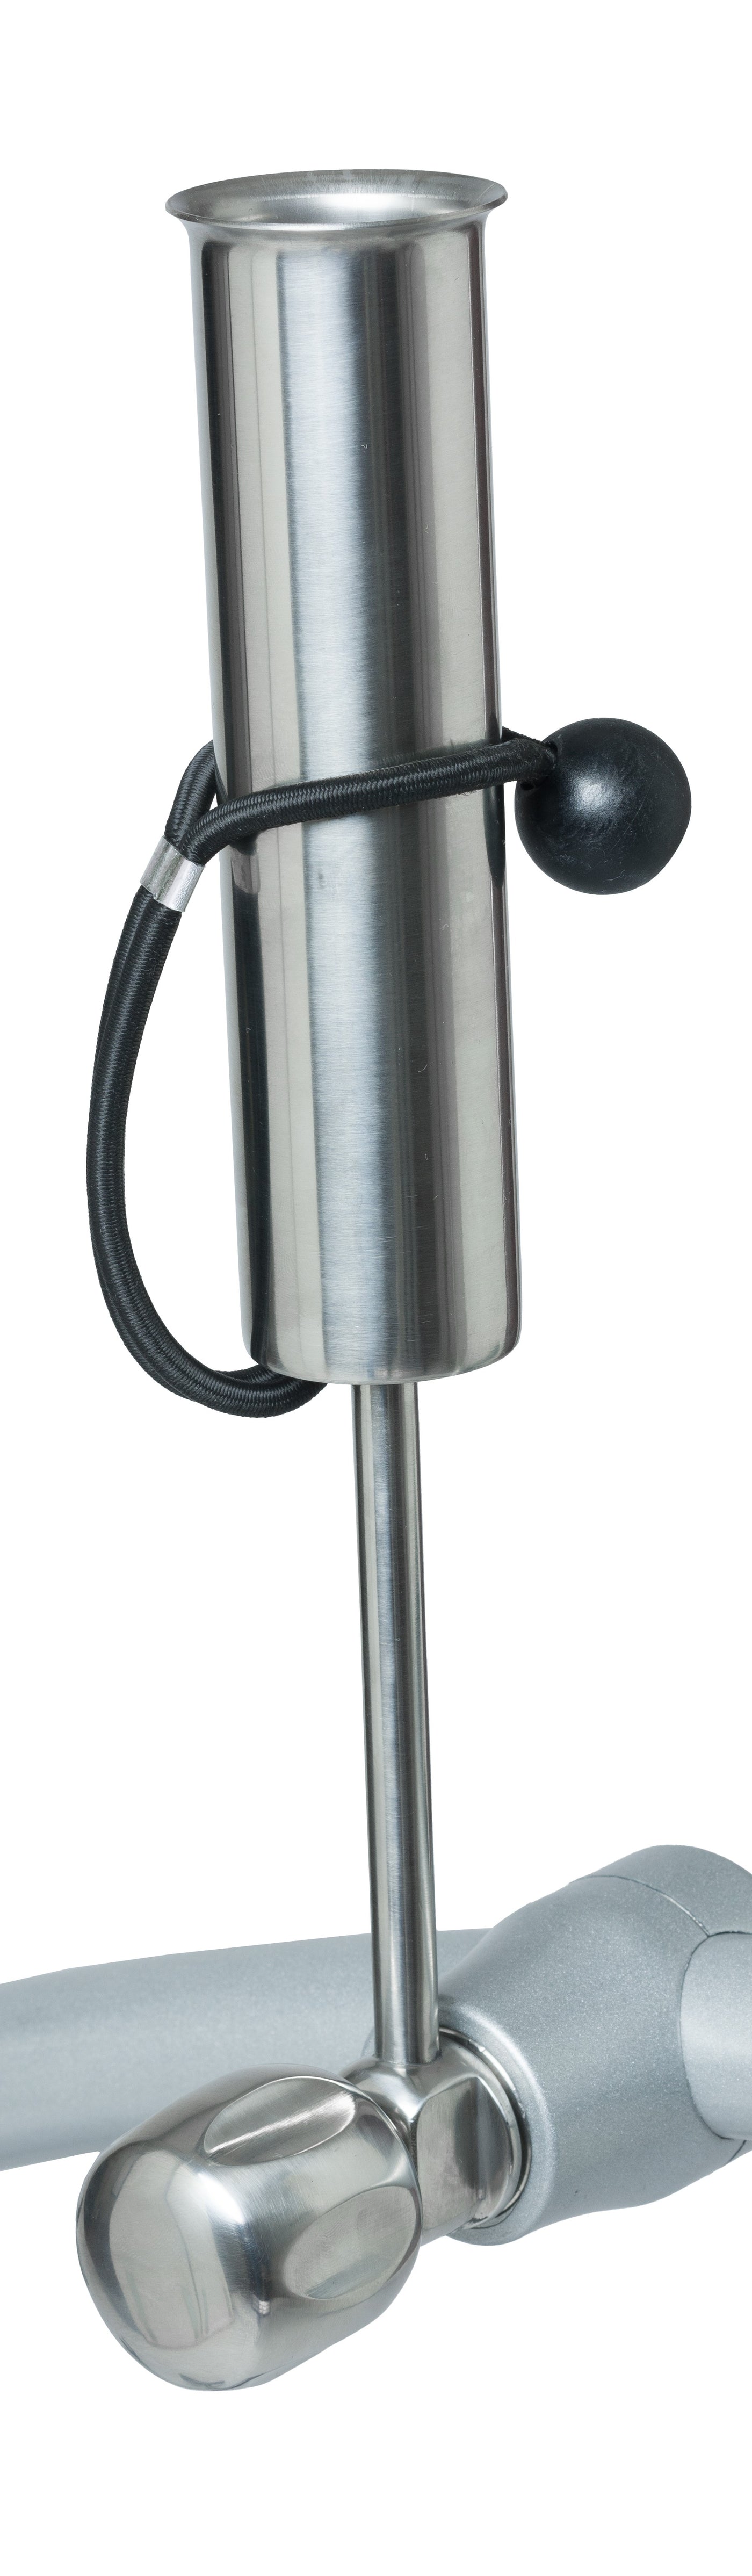 Leisure and Sports umbrella holder stainless steel